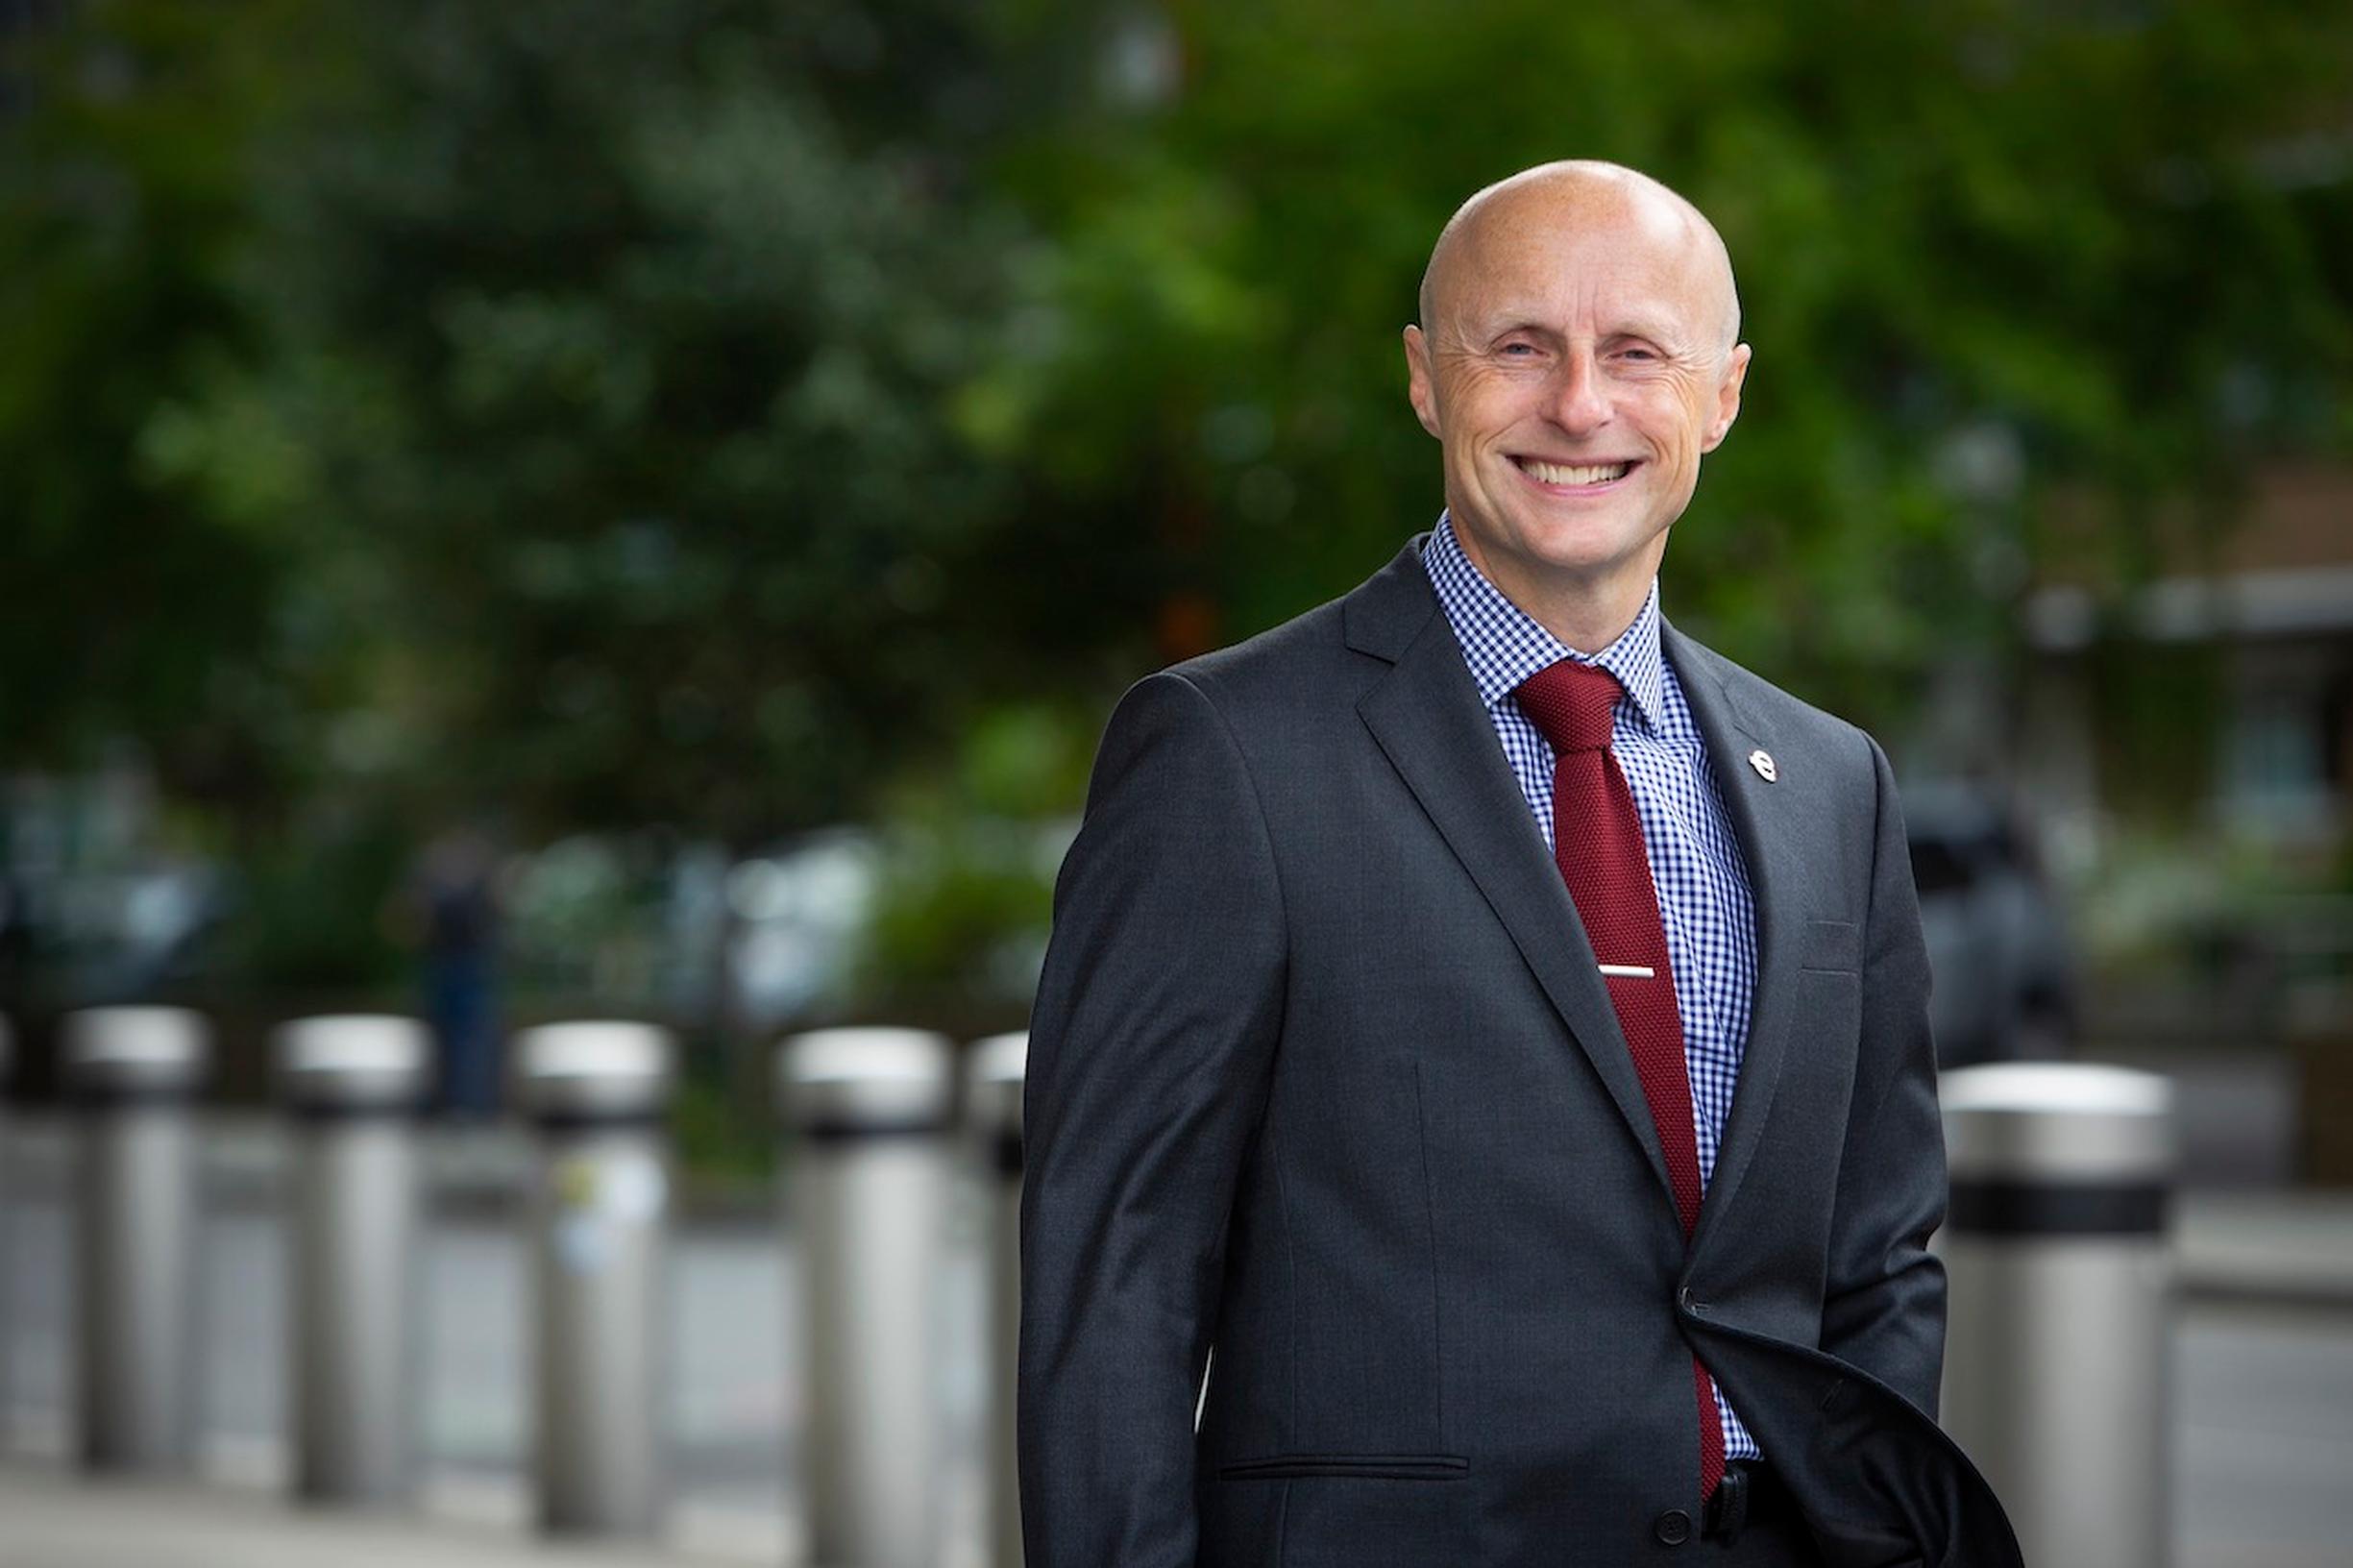 Leaving: Andy Byford